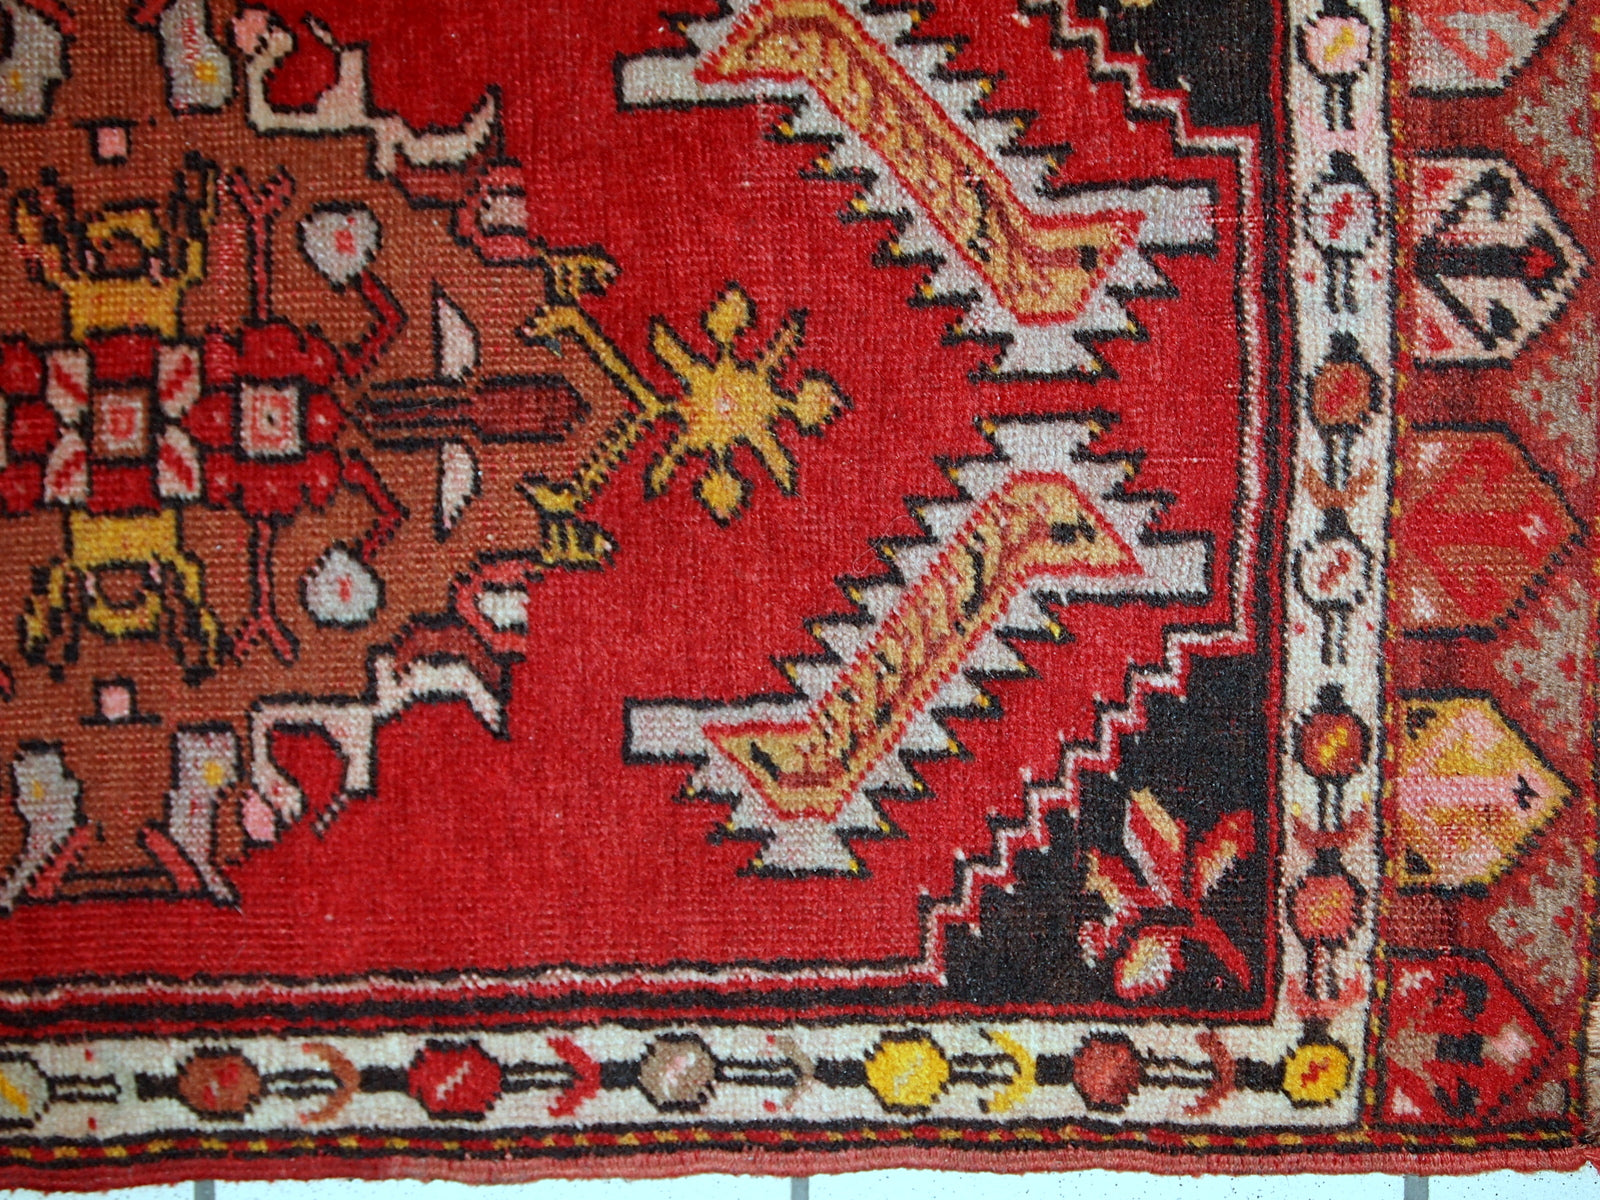 Handmade vintage Turkish Yastik rug in bright red colour. The rug is in original good condition from the middle of 20th century.